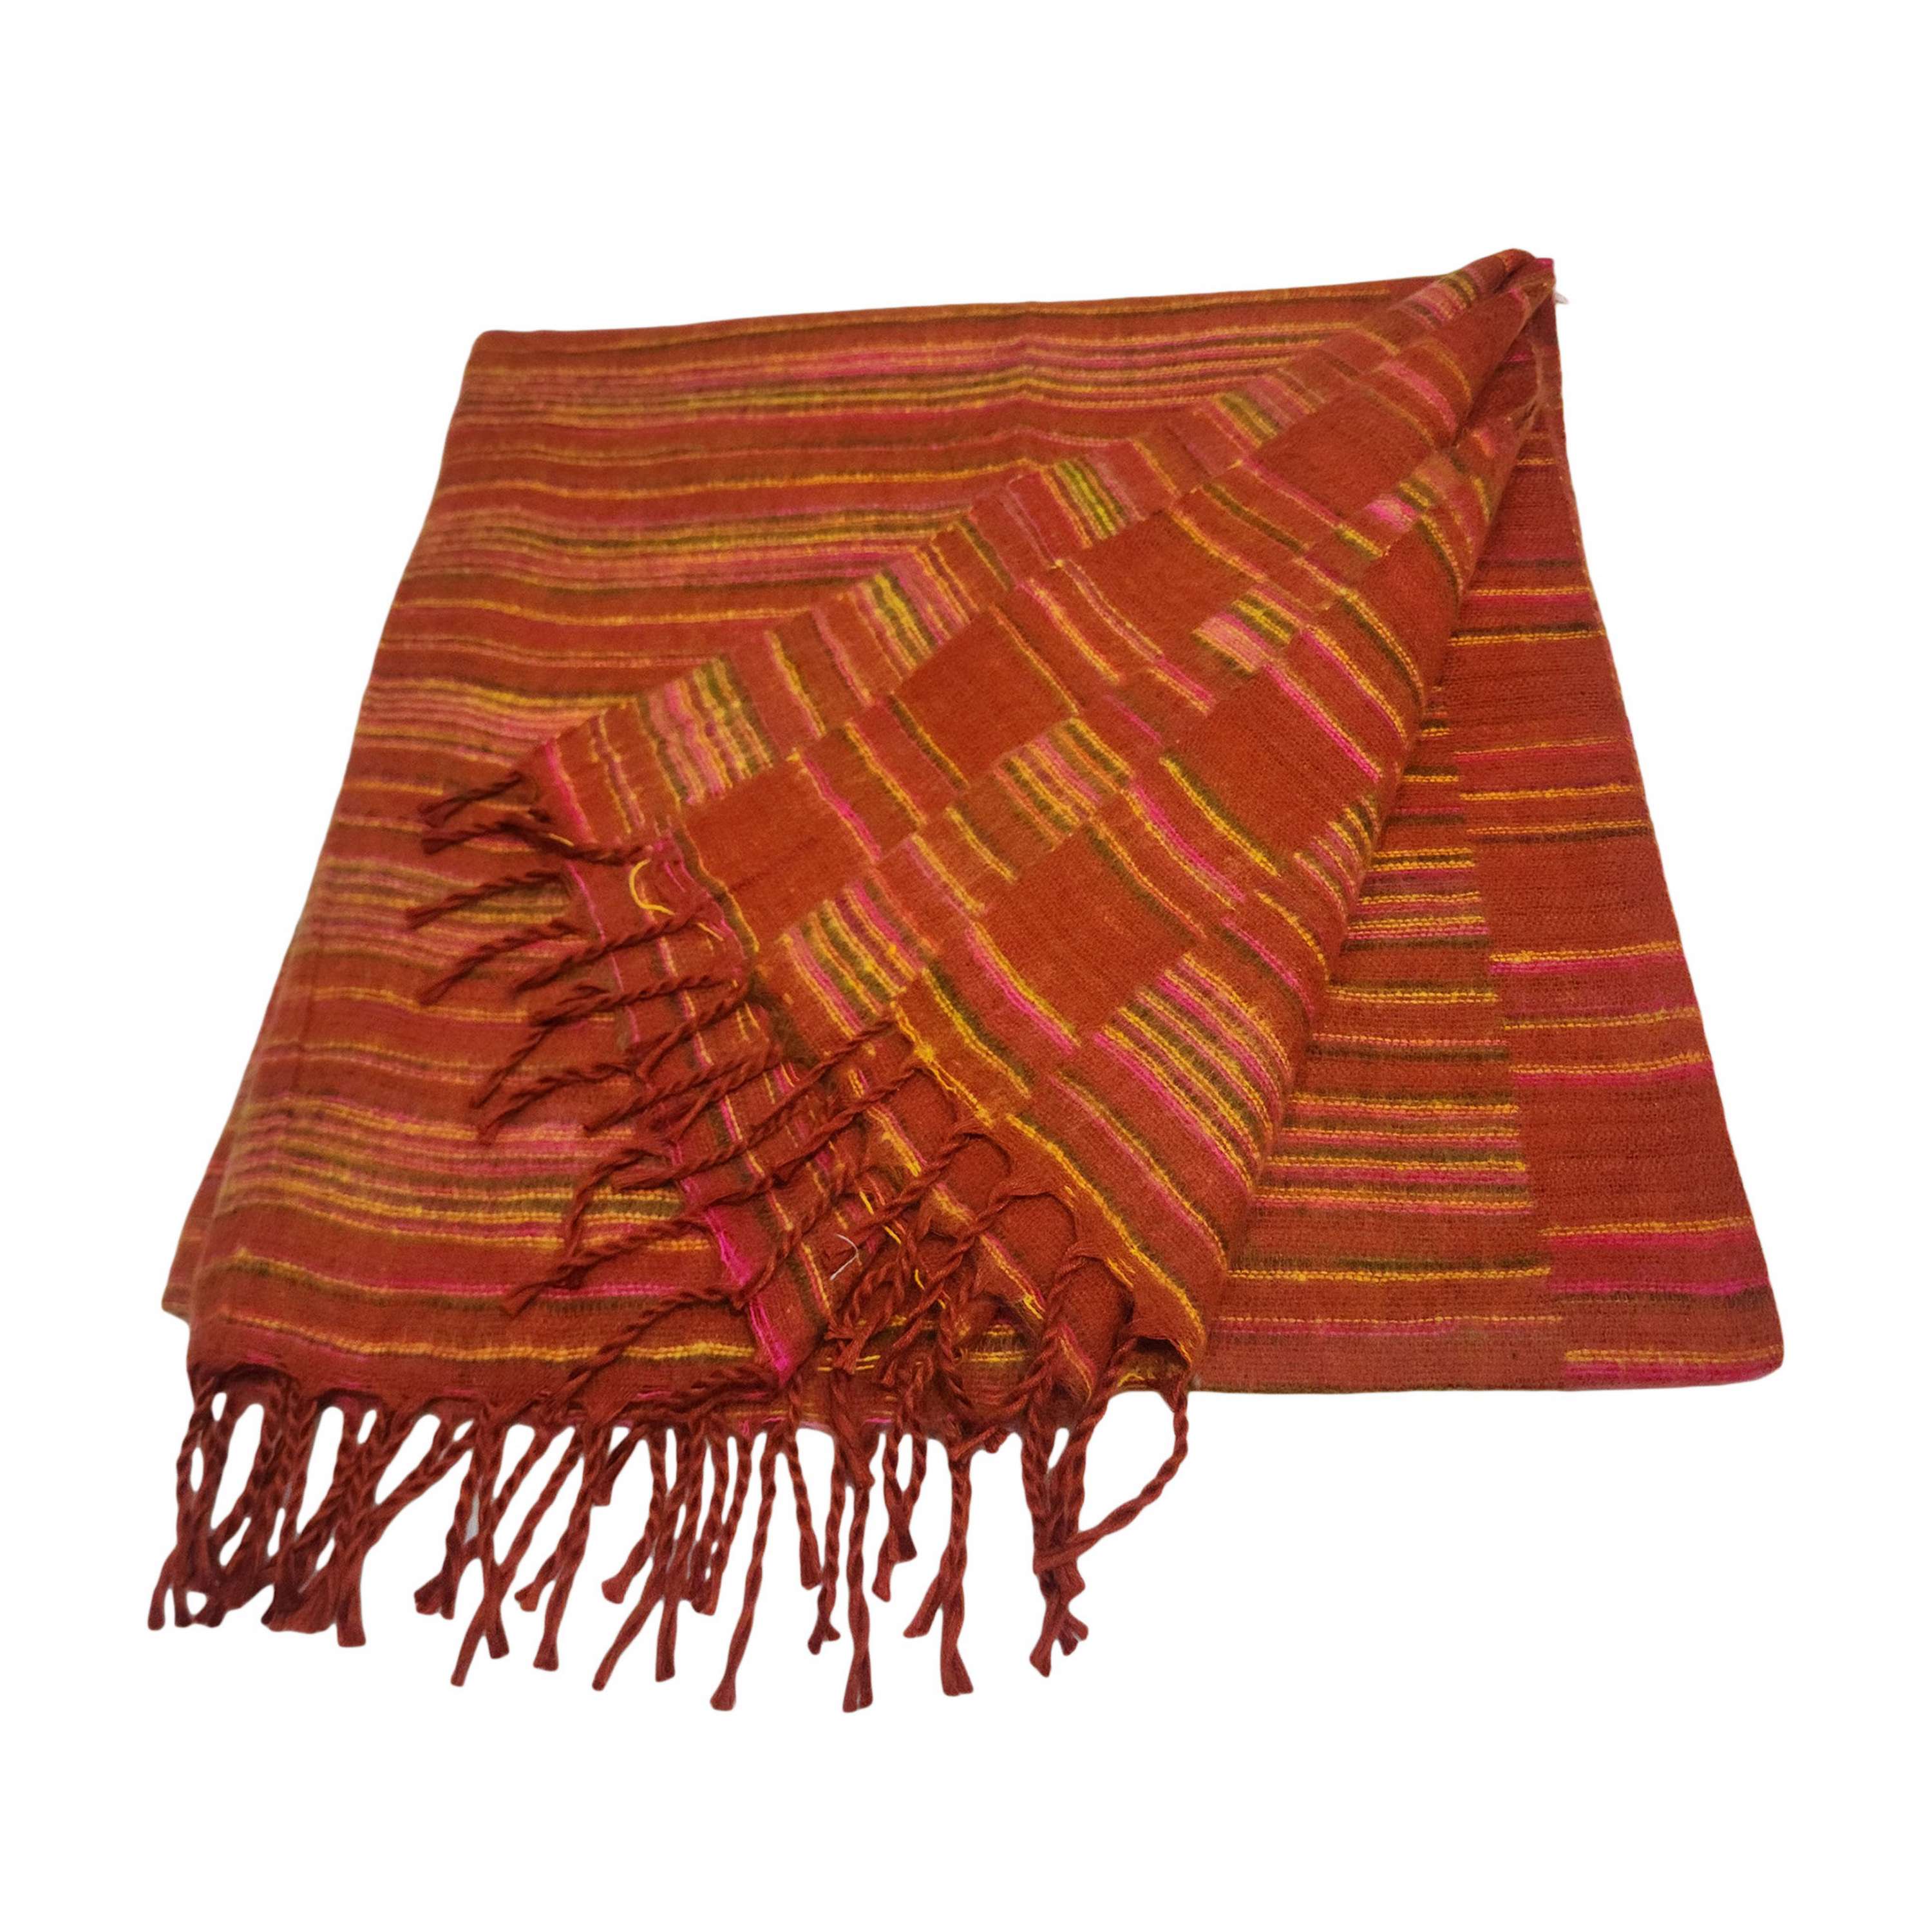 Tibet Shawl, Effortless Style: Acrylic Woolen Shawls For The Modern Fashionista In Rust Brown Color <span Style=